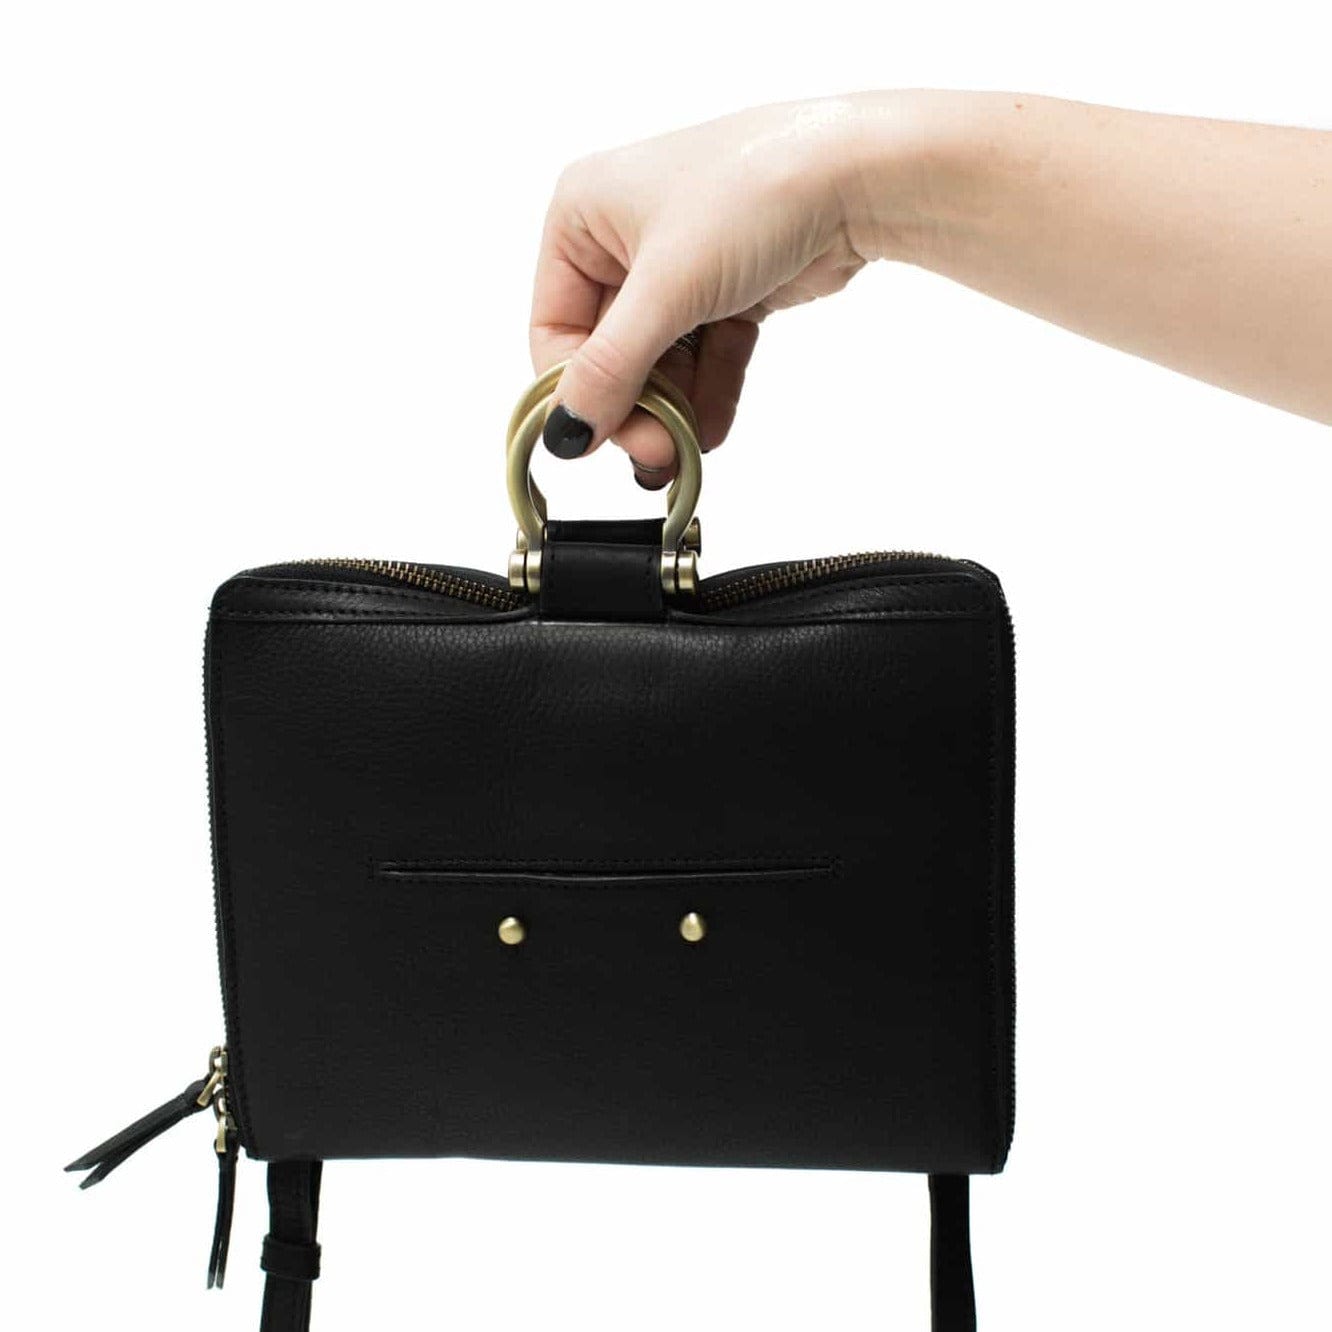 Carry the M mini crossbody bag in black raw leather by the Omega brass hardware.